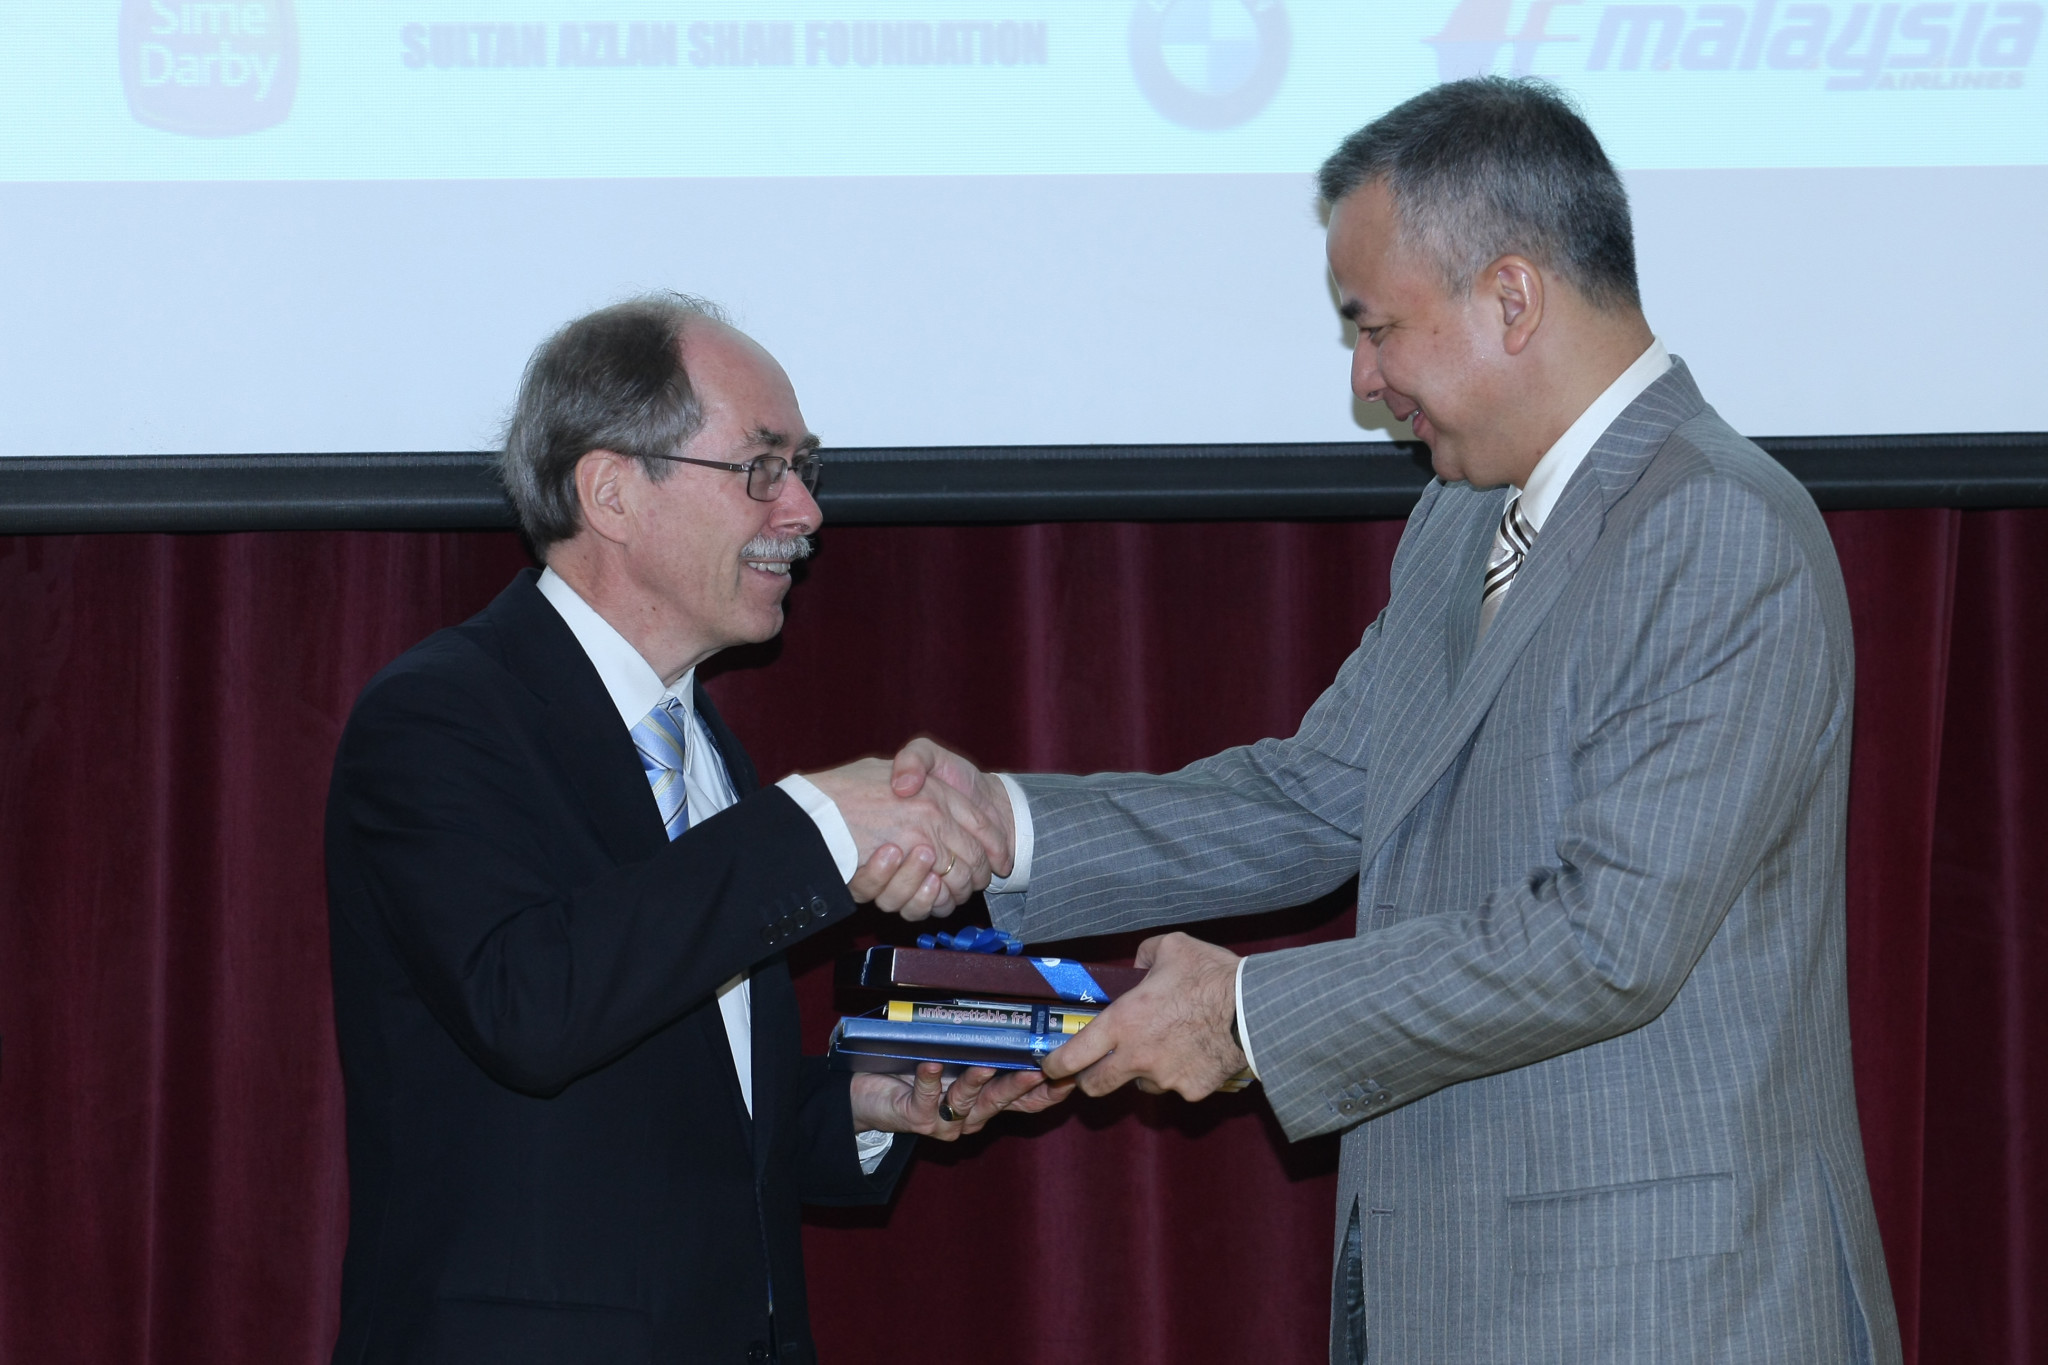 Physics Nobel Laureate Prof. Gerardus 't Hooft with HRH Raja Nazrin Shah, Crown Prince of the State of Perak and Malaysian Honorary Chairman of Bridges